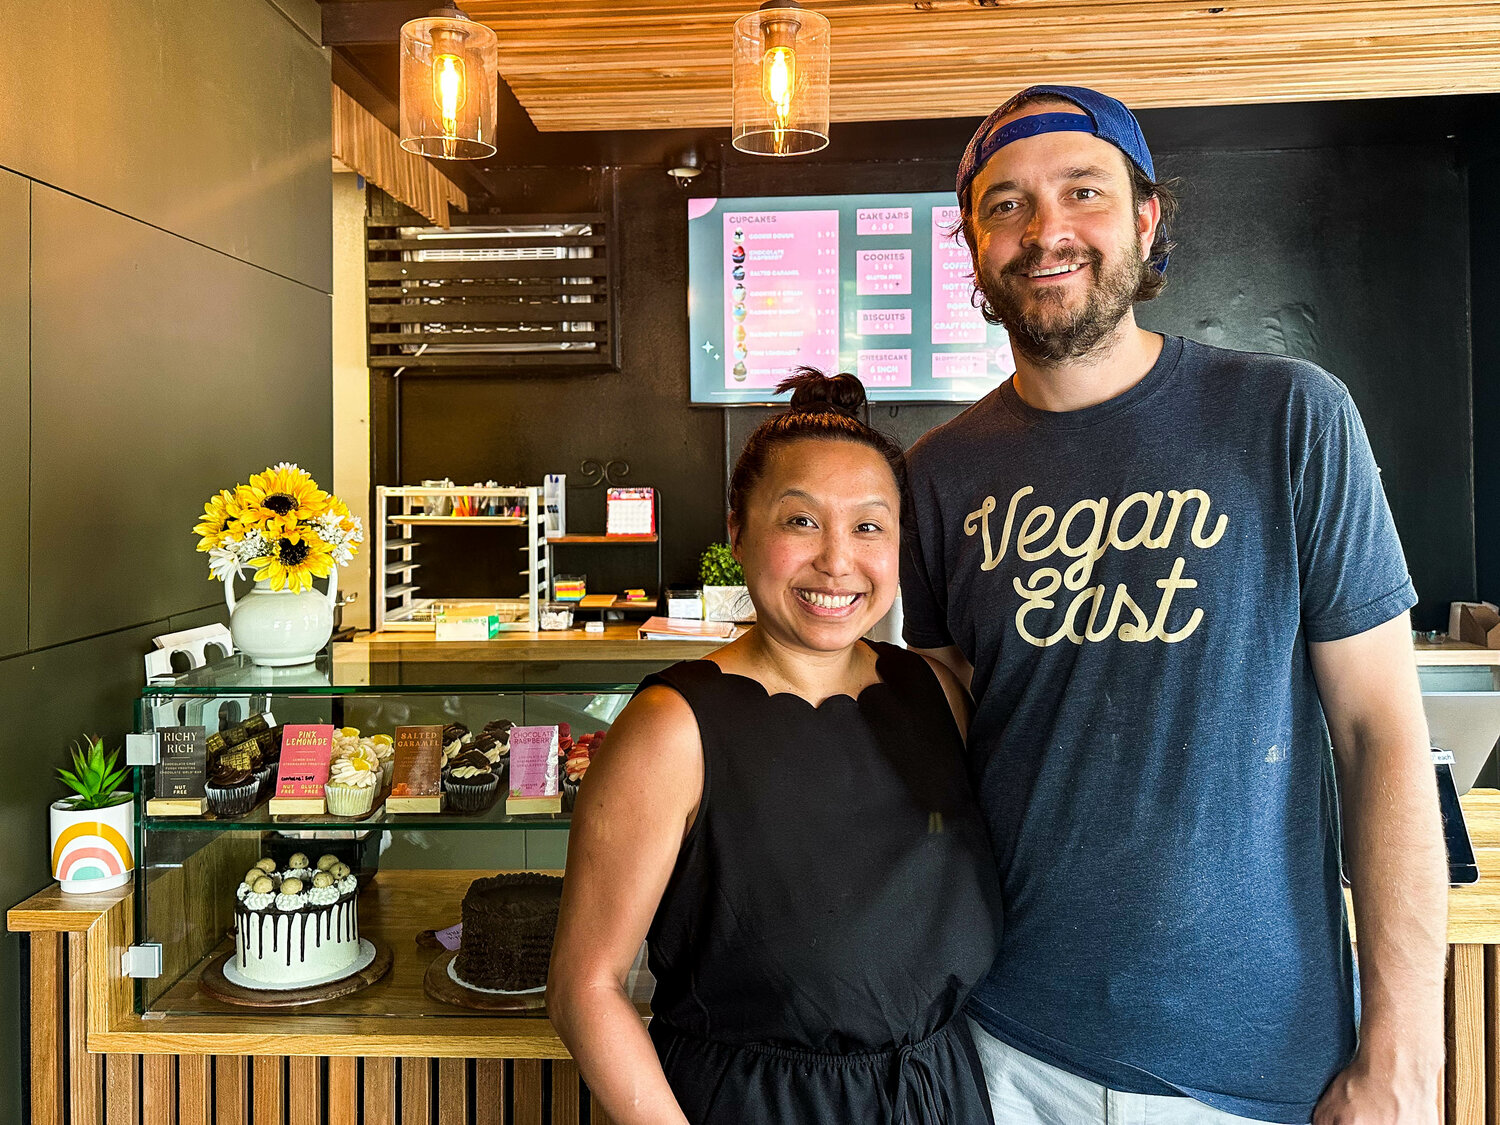 Sheila and Reid Nelson own Vegan East, which recently opened at 5501 34th Ave. S. Sheila handles the baking and Reid the business side. (Photo submitted)